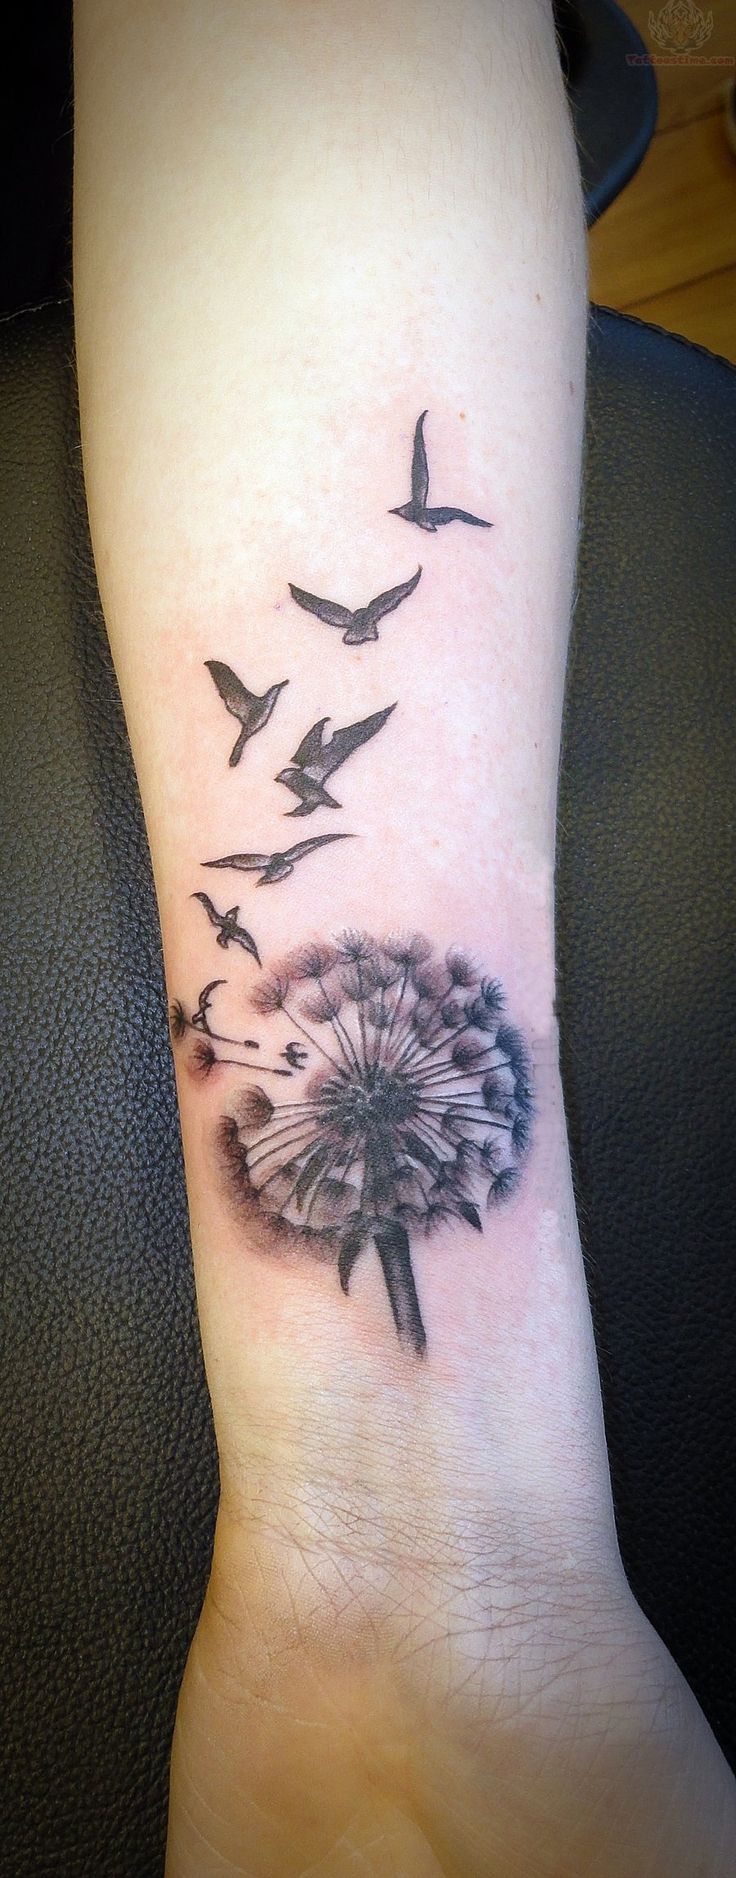 Small Raven done by JTattooRS on FB from Slovakia  rtattoo